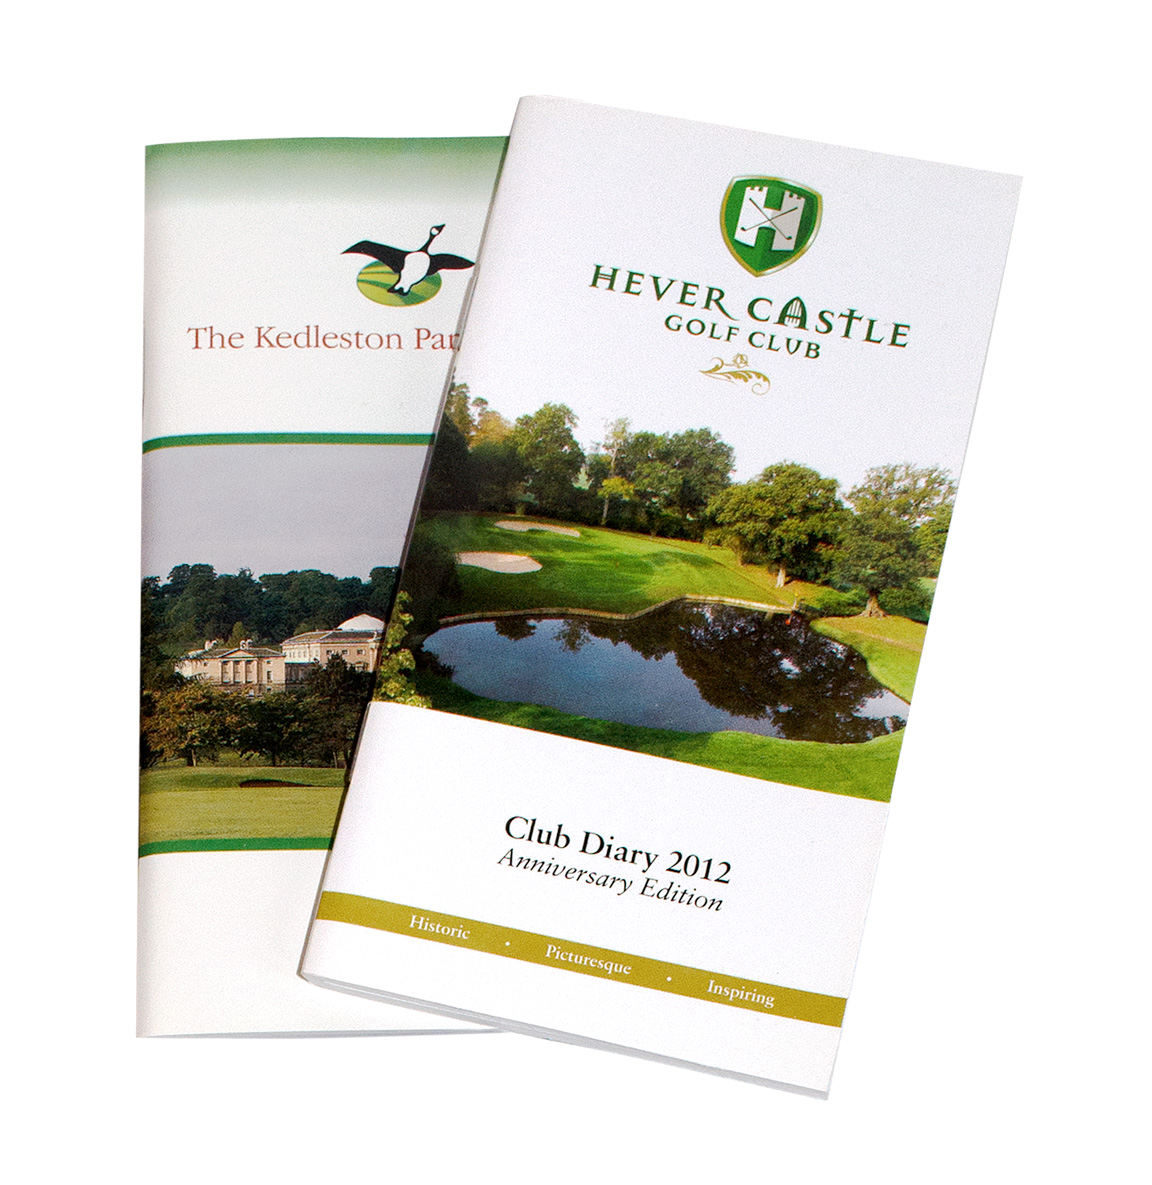 Saddle Stitched Full Colour Fixture Books by K&M Golf